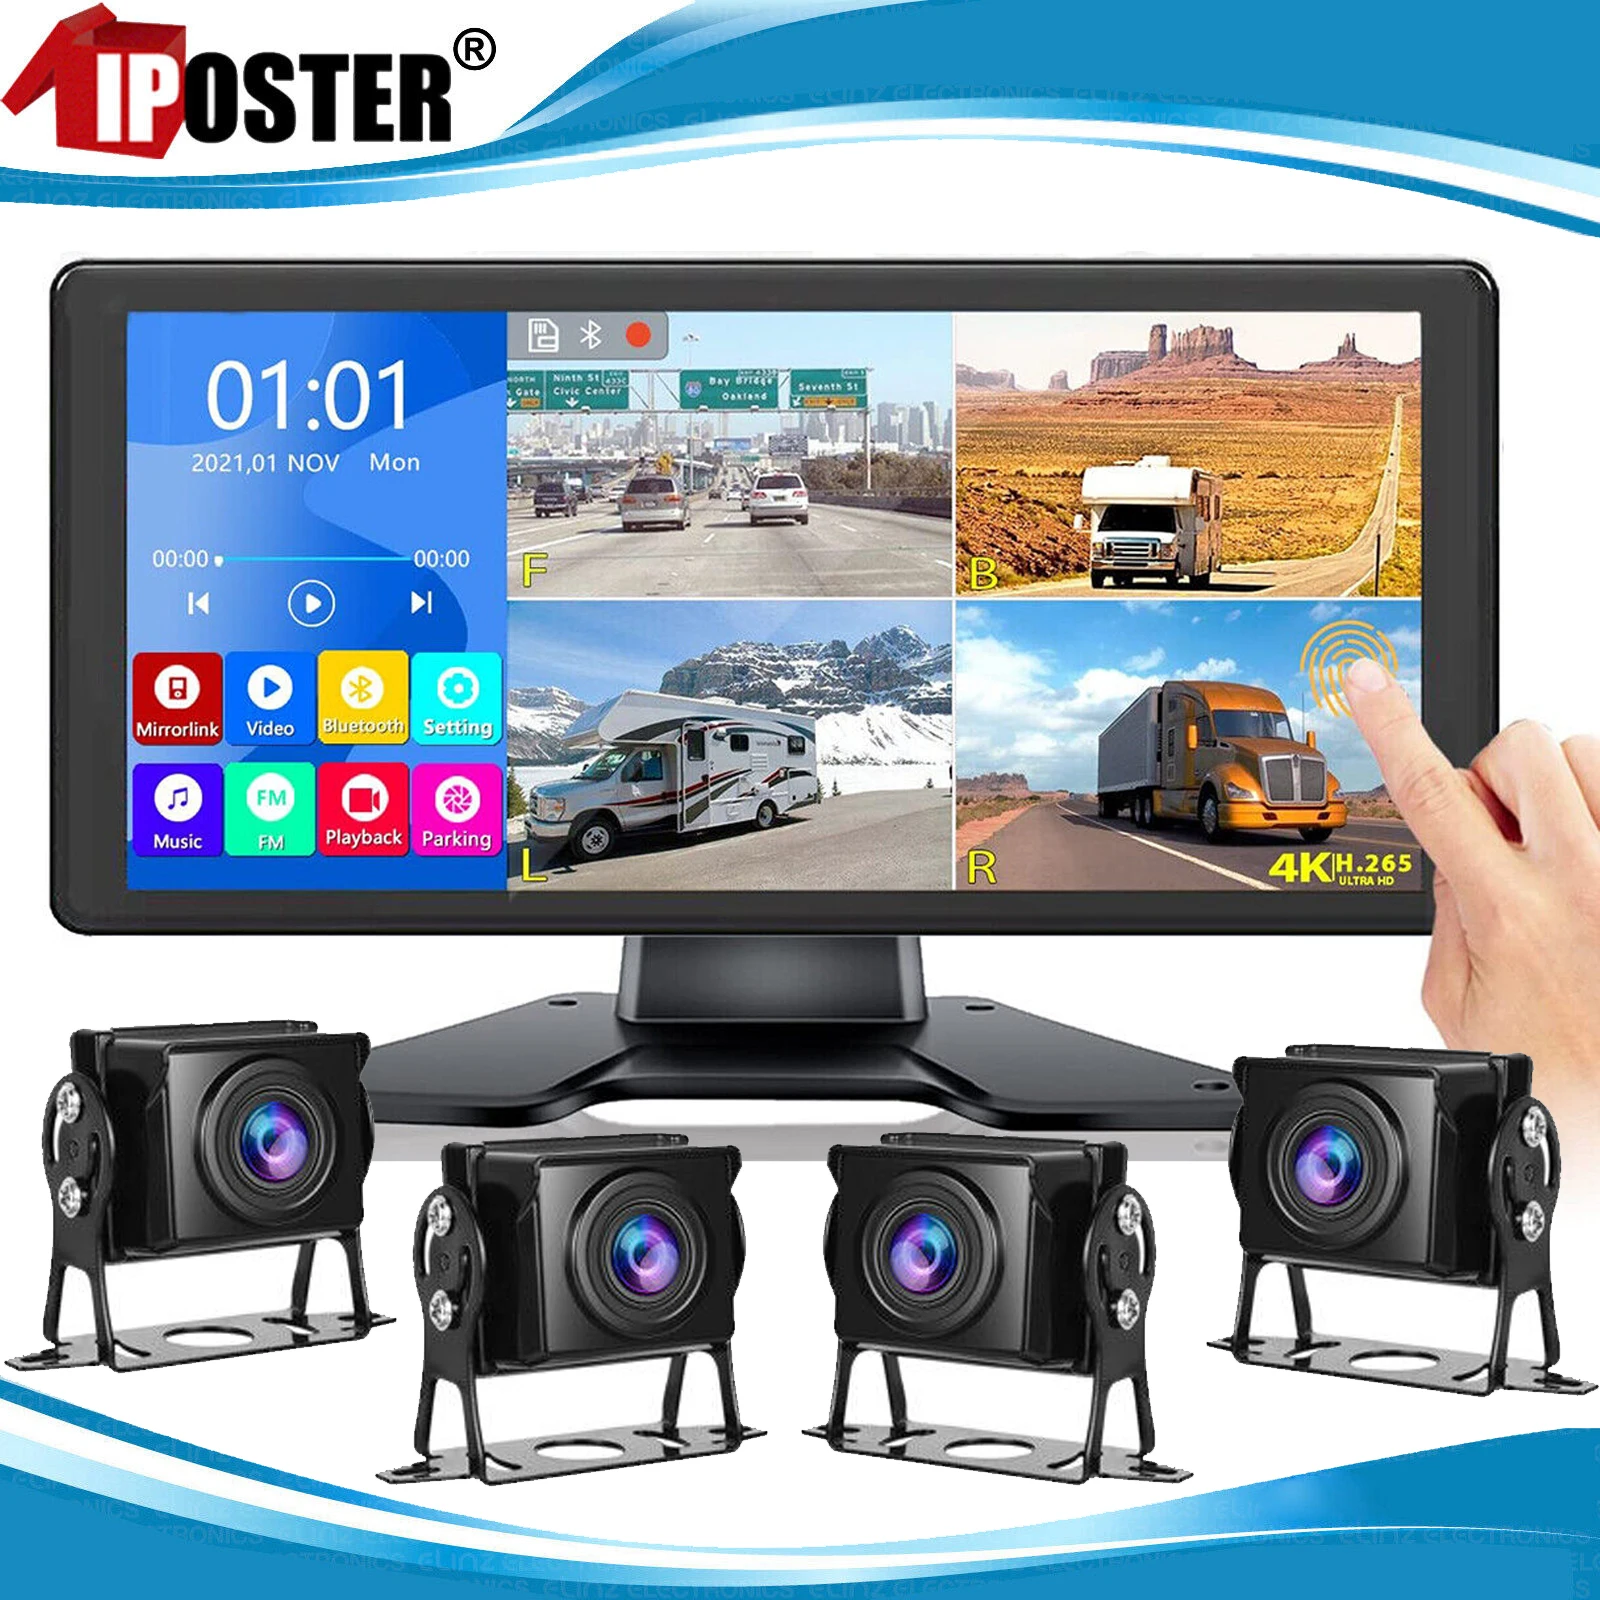 

iPoster 10.36" Touch Screen Monitor DVR Bluetooth FM MP5 with 4x 4PIN AHD 1080P Rear View Cameras 12-36v For Truck Rv Caravan